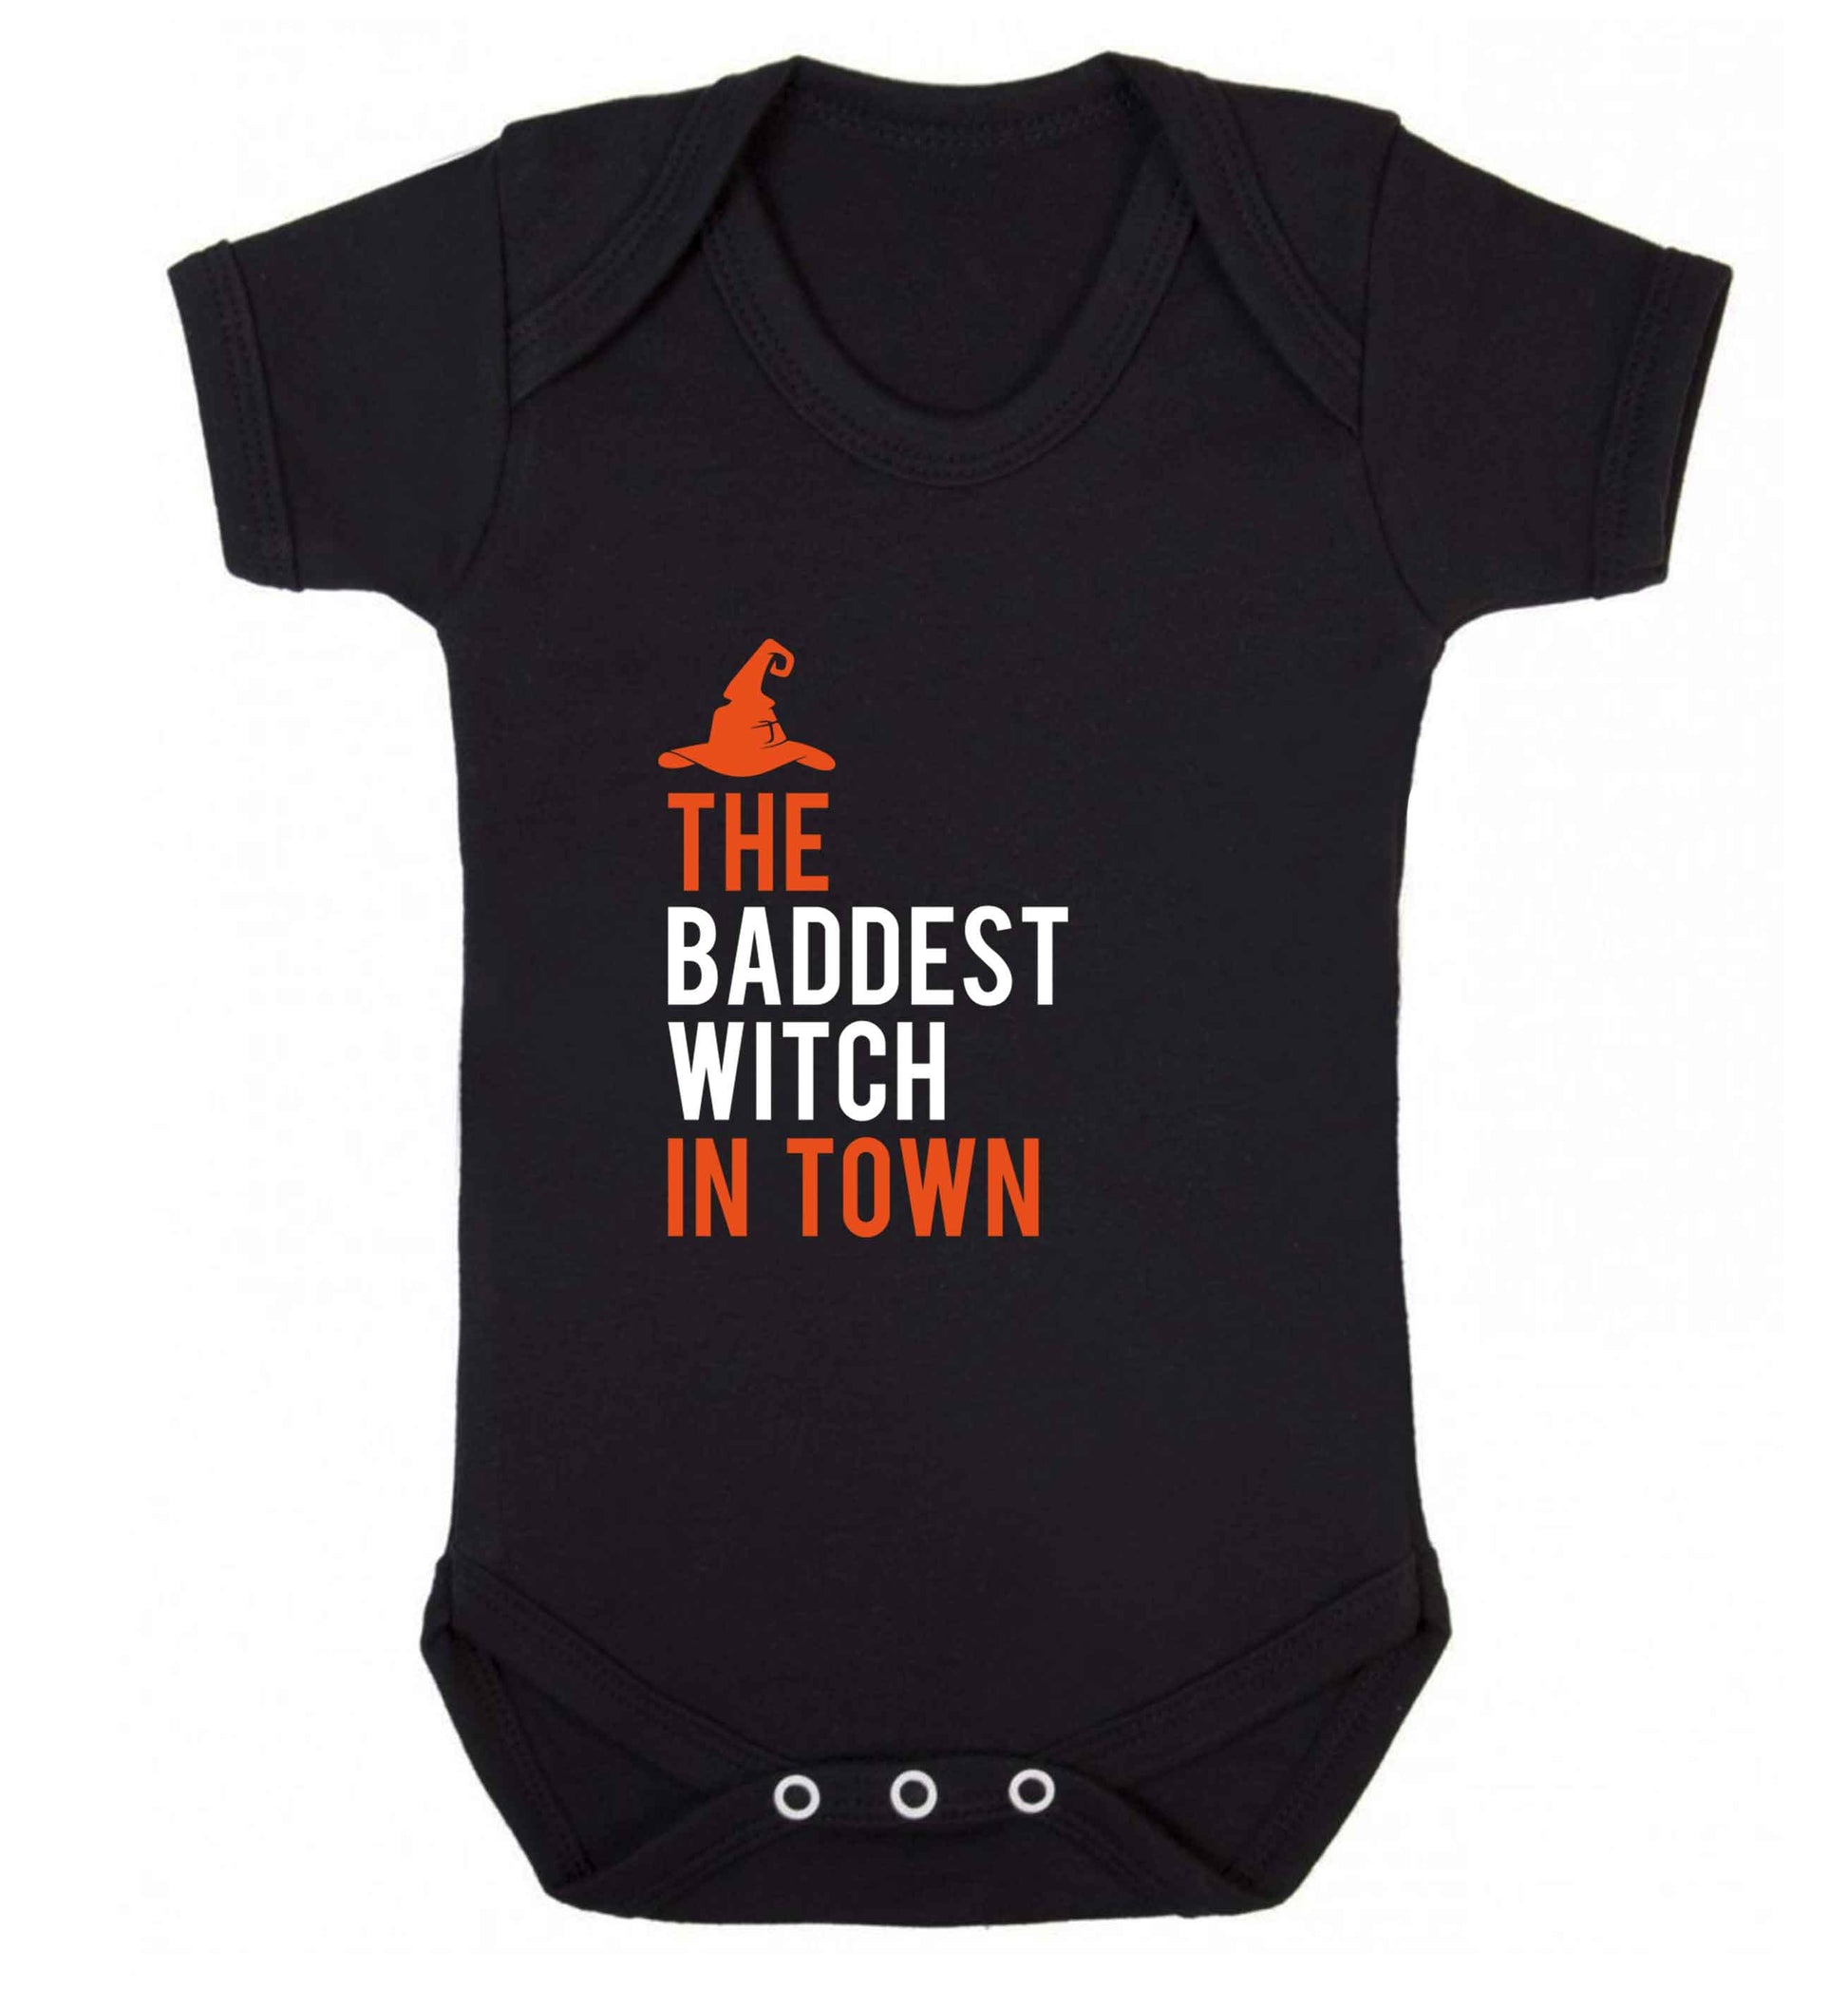 Badest witch in town baby vest black 18-24 months